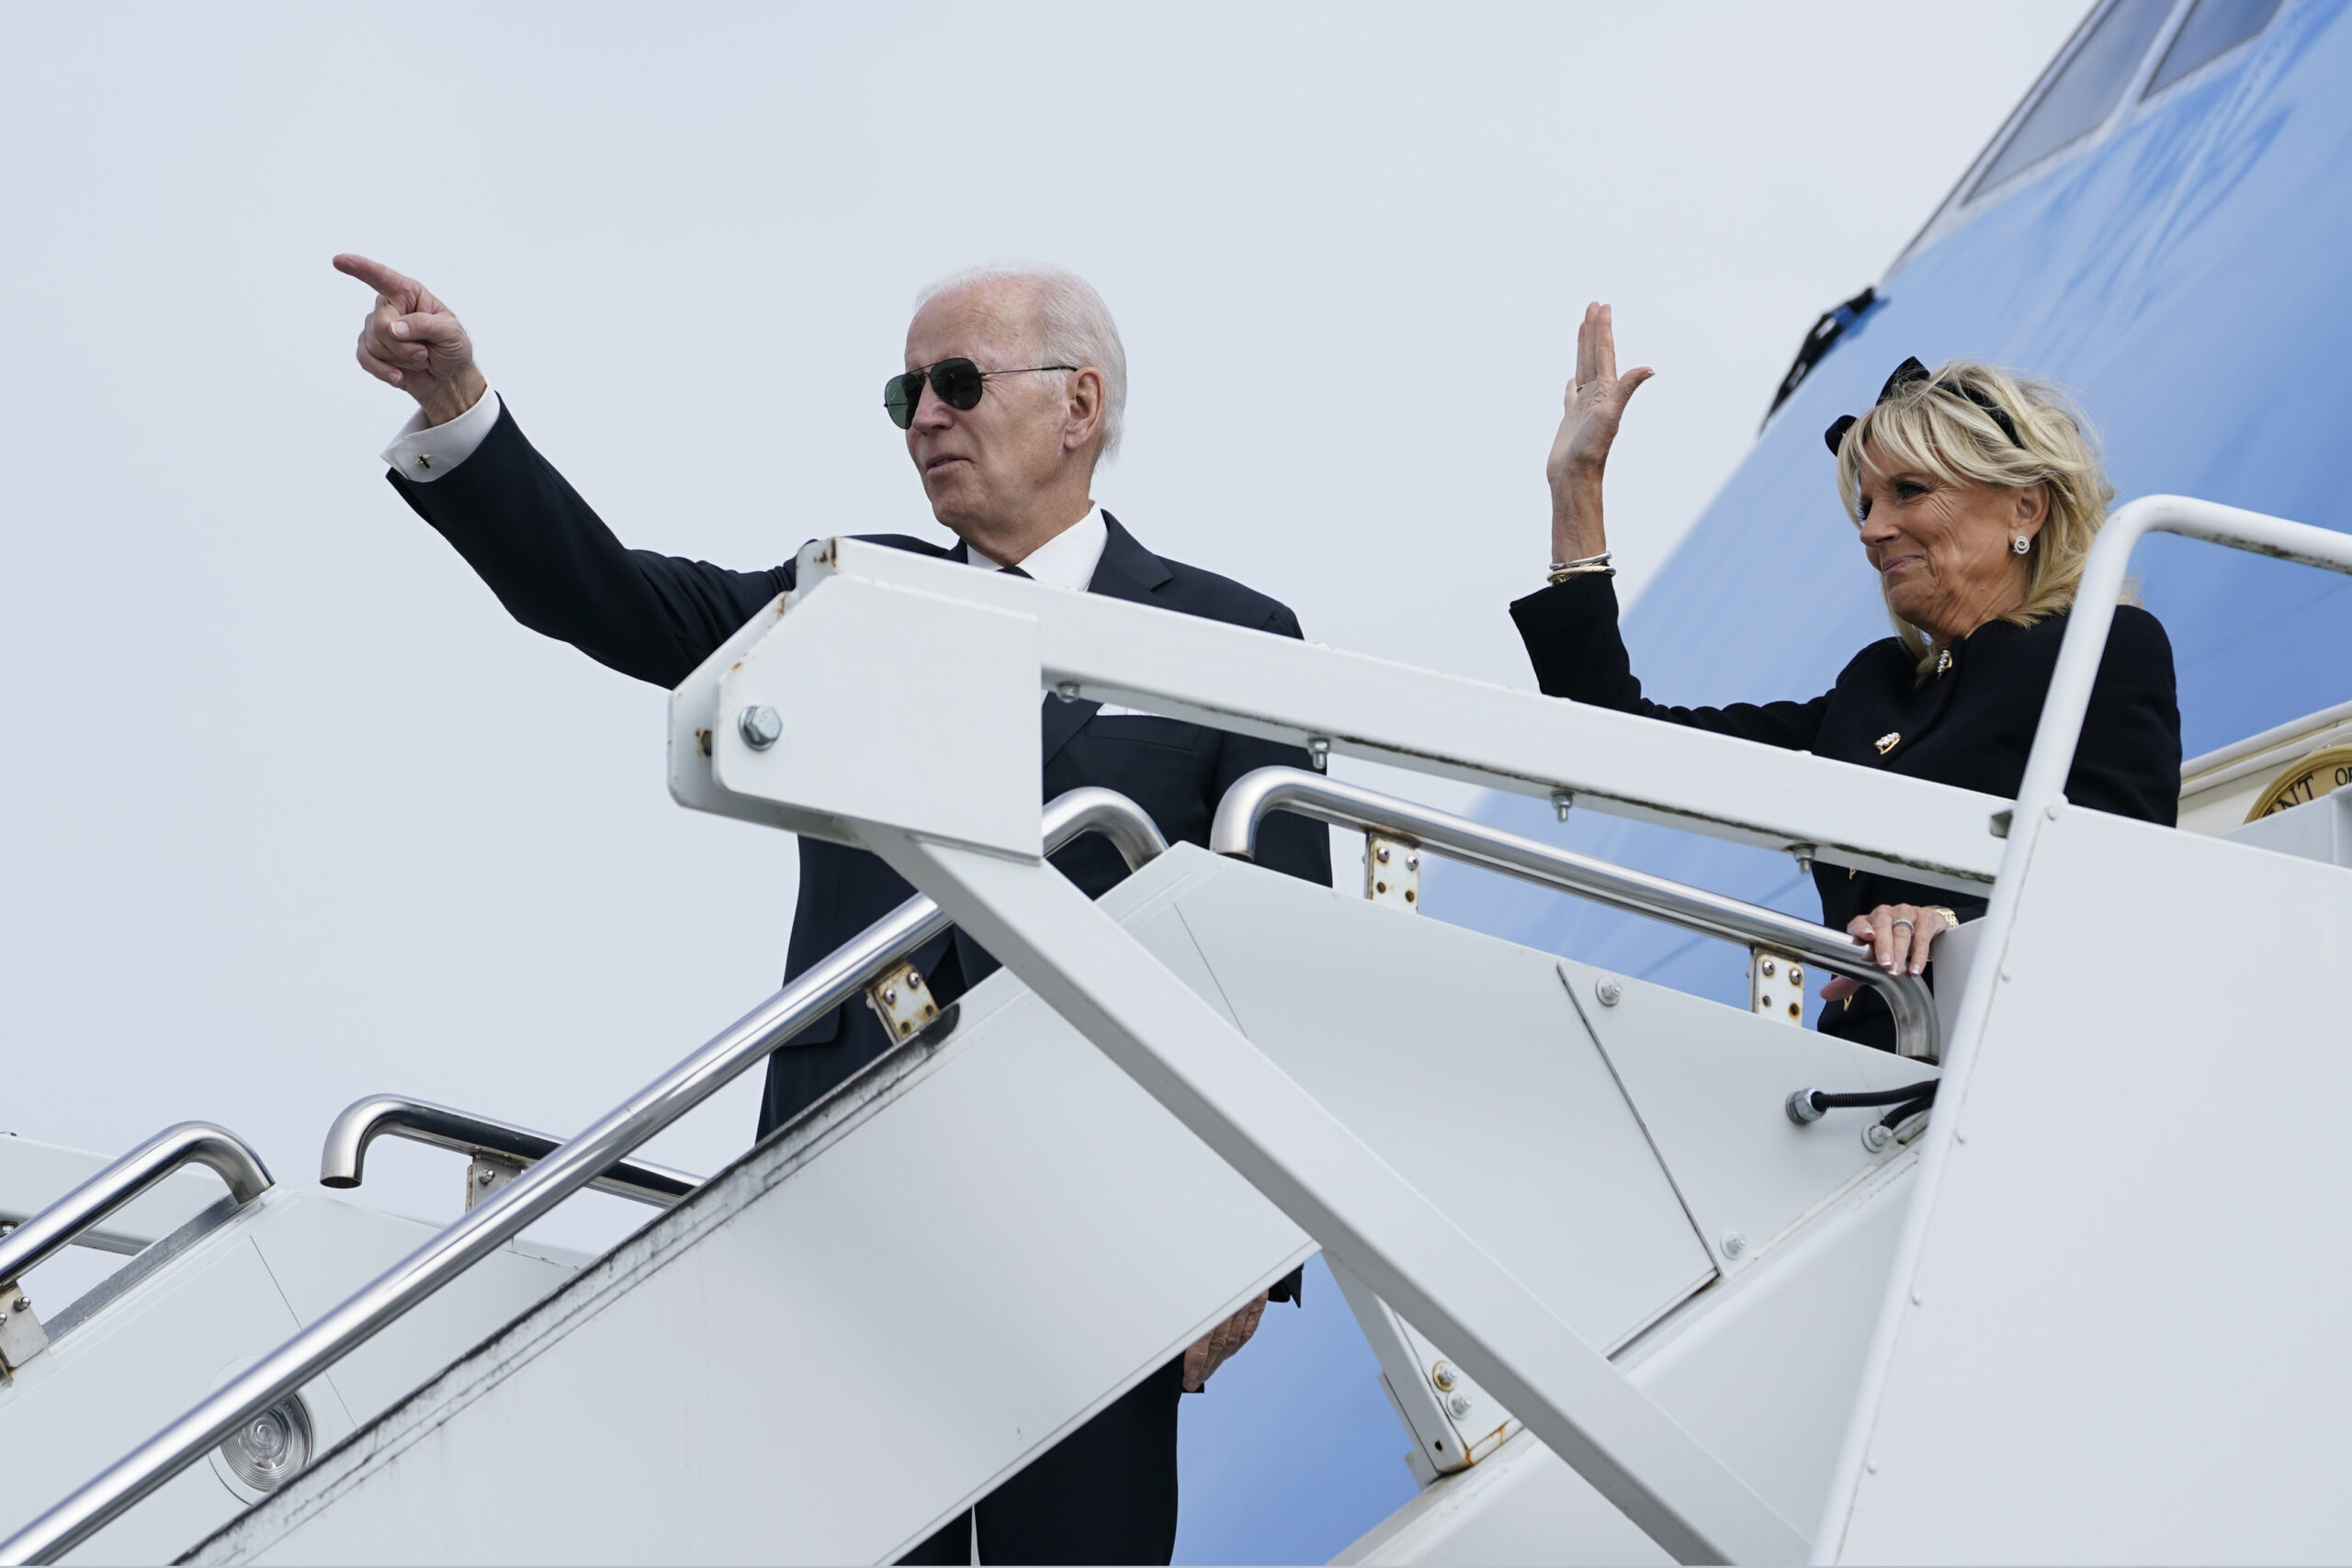 Biden again indicates that US will defend Taiwan ‘militarily’ – does this constitute a change in policy?